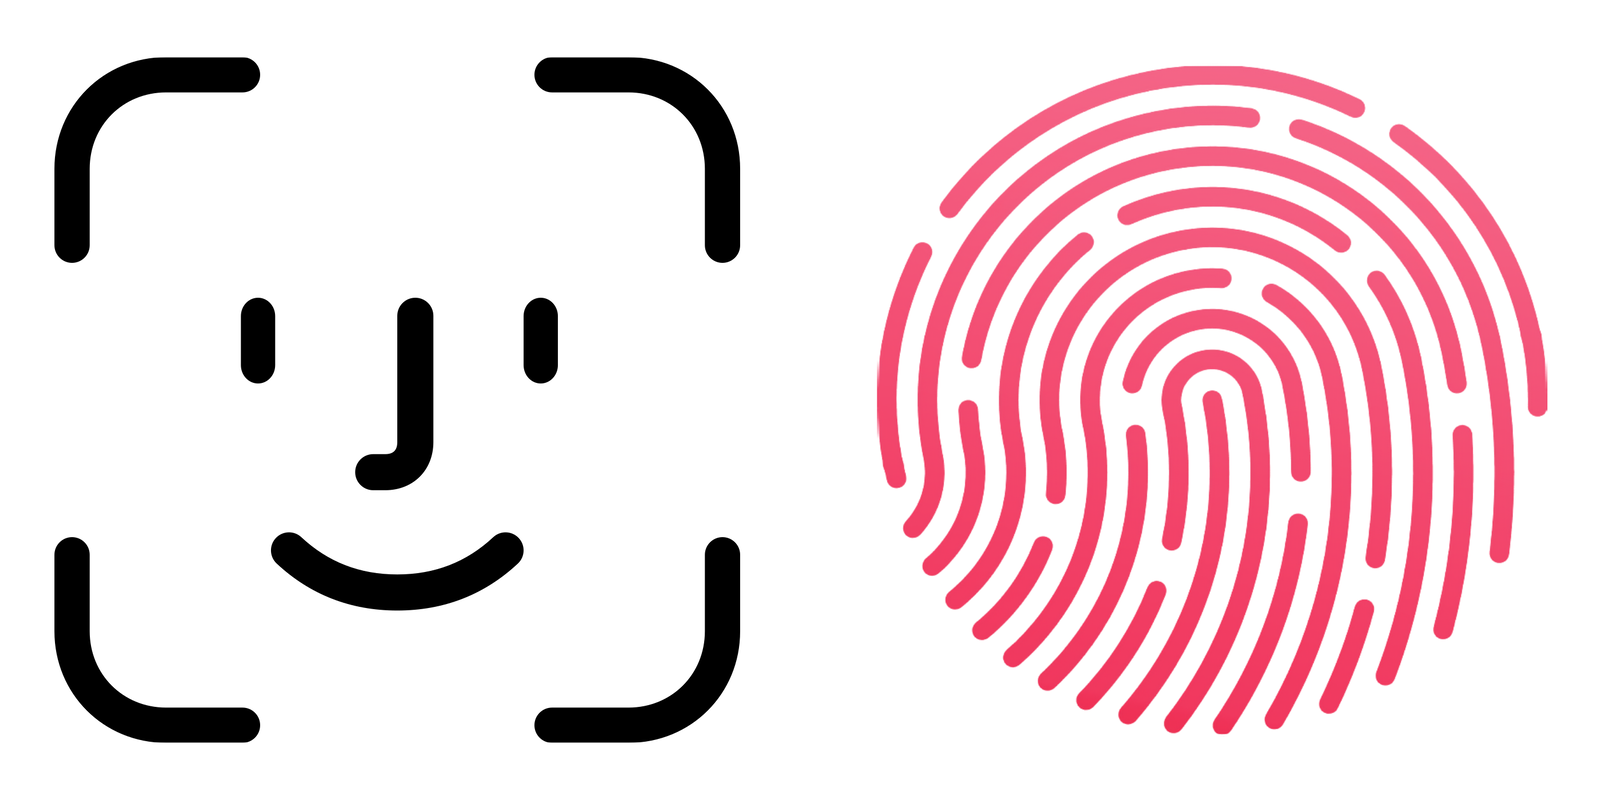 Is Apple Face ID more secure than password?